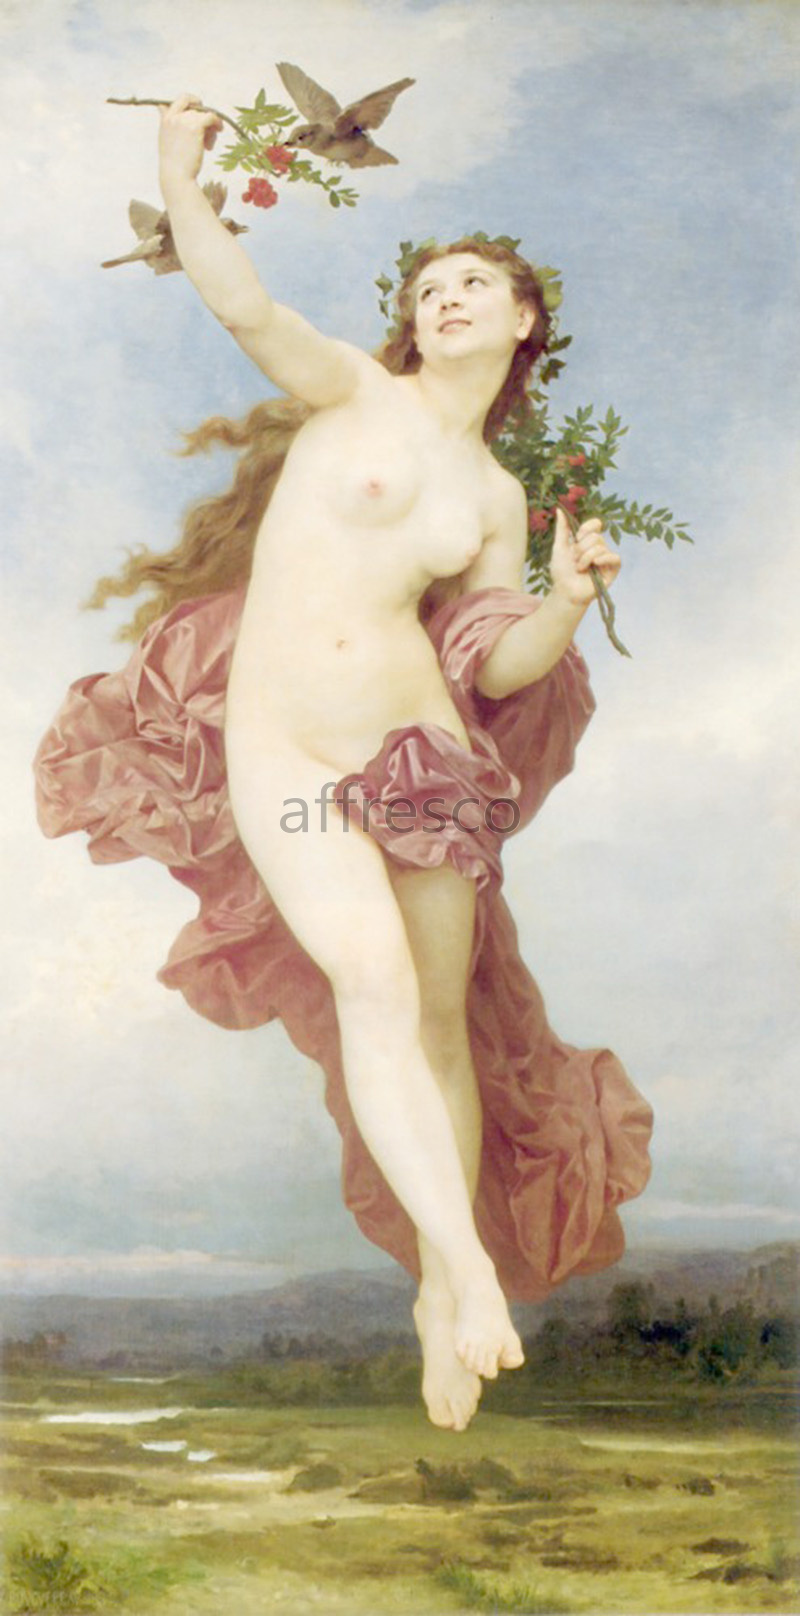 Classical antiquity themes | William Adolphe Bouguereau Day | Affresco Factory